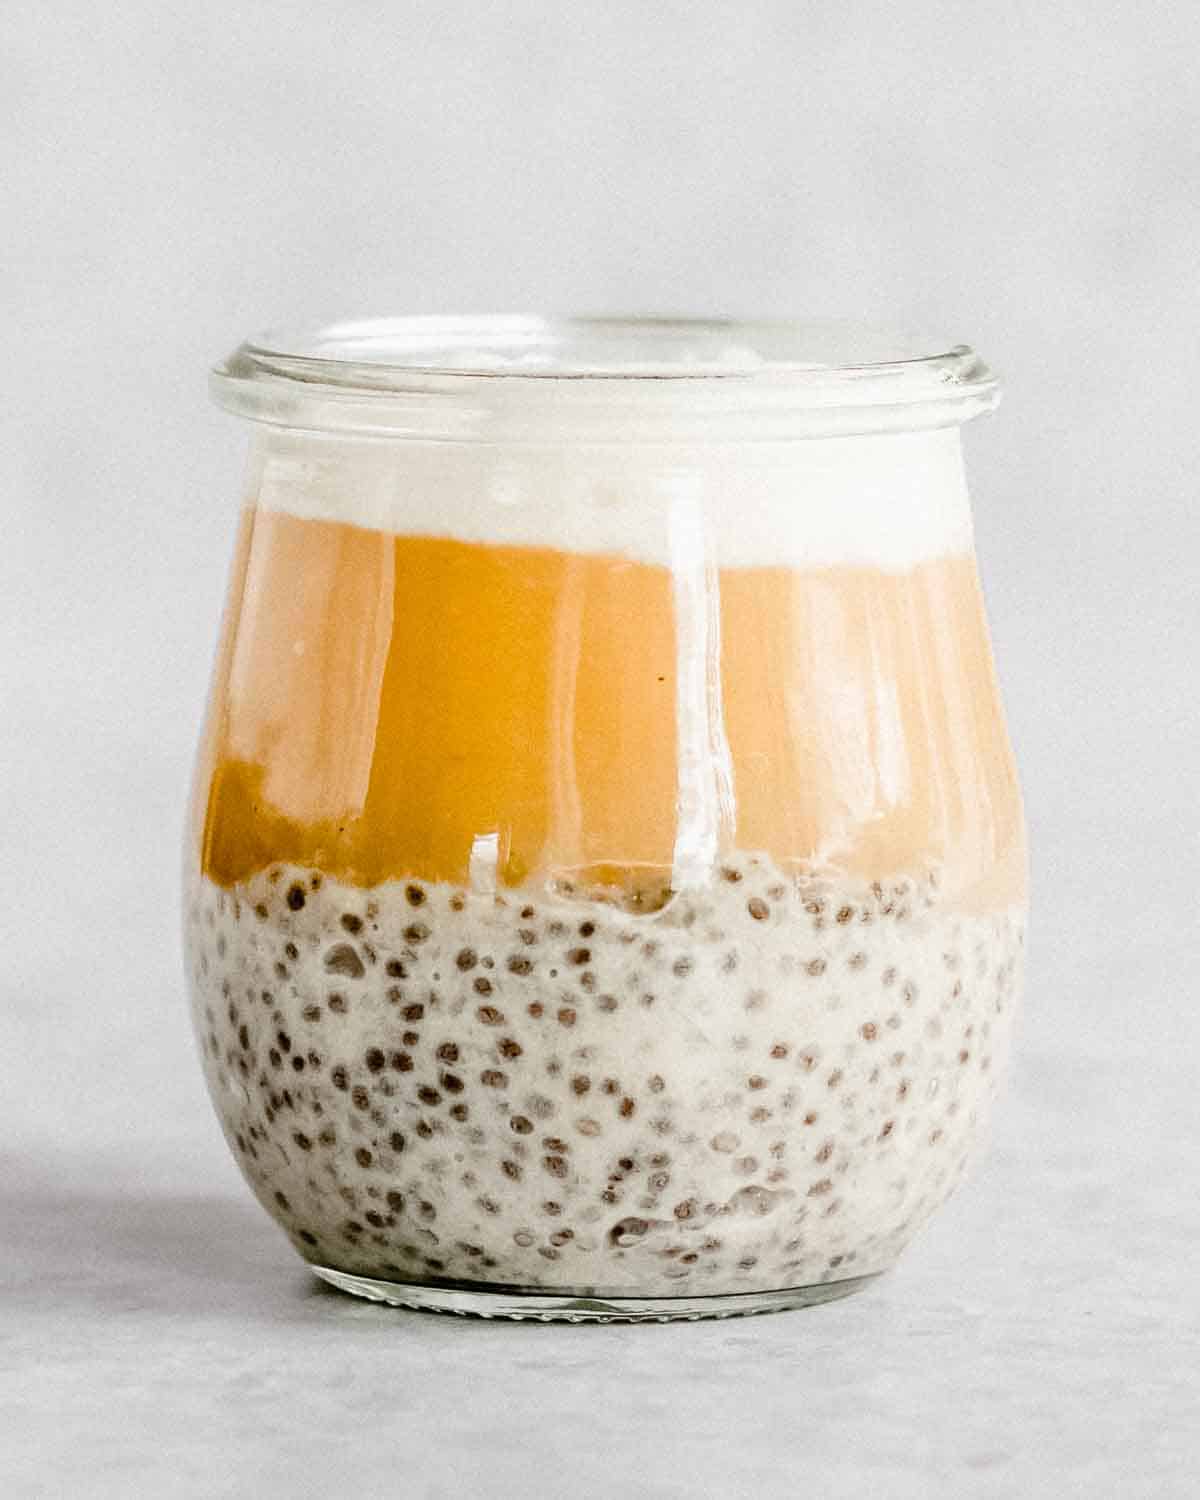 ⅓ of a serving glass filled with apple chia seeds, followed by some applesauce and Greek yogurt.